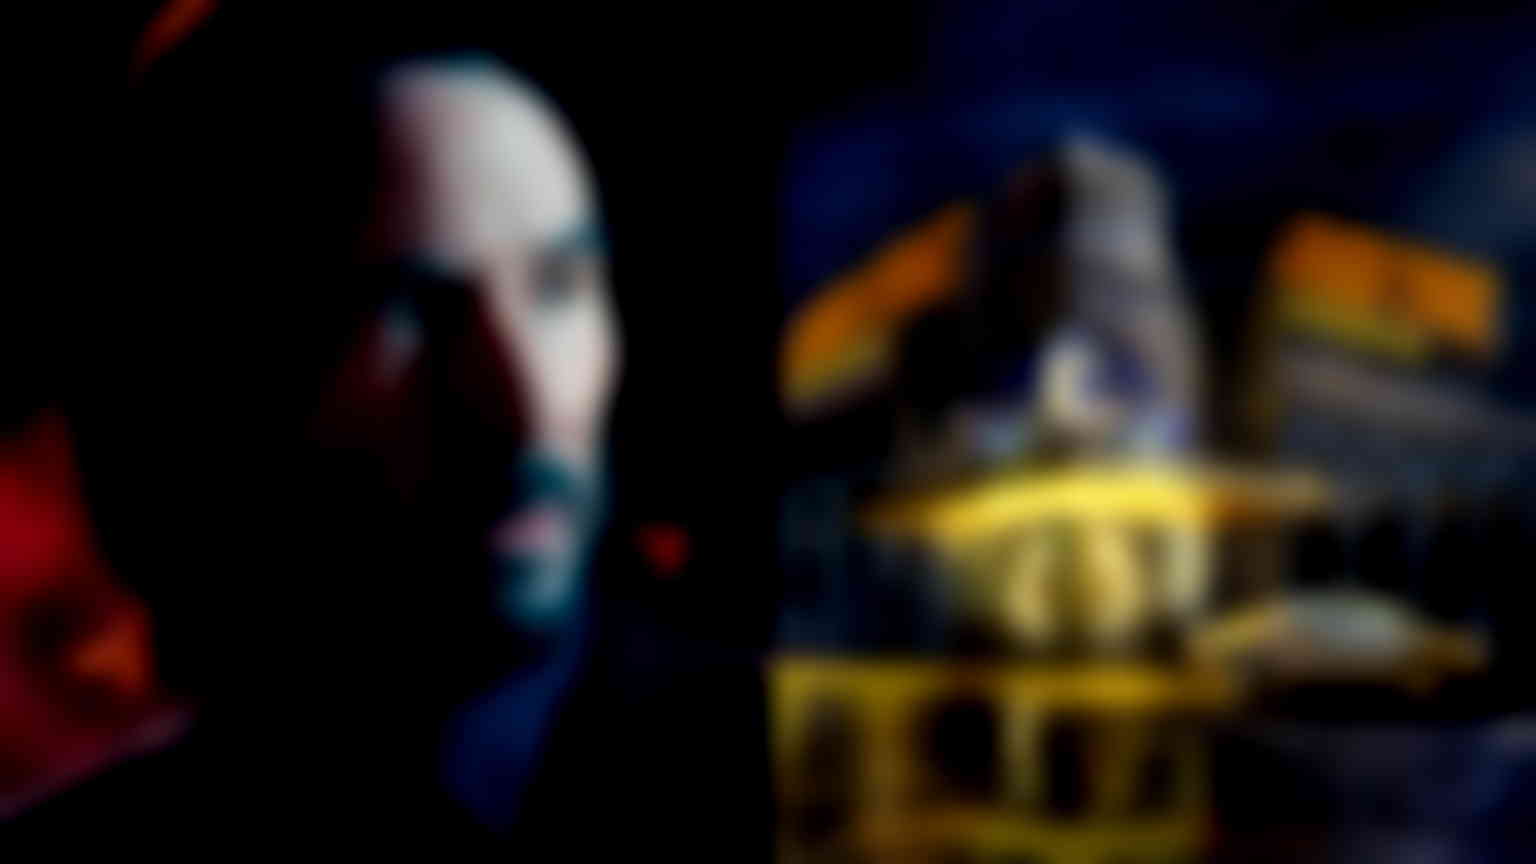 12,000-square-foot ‘John Wick Experience’ attraction set for Las Vegas